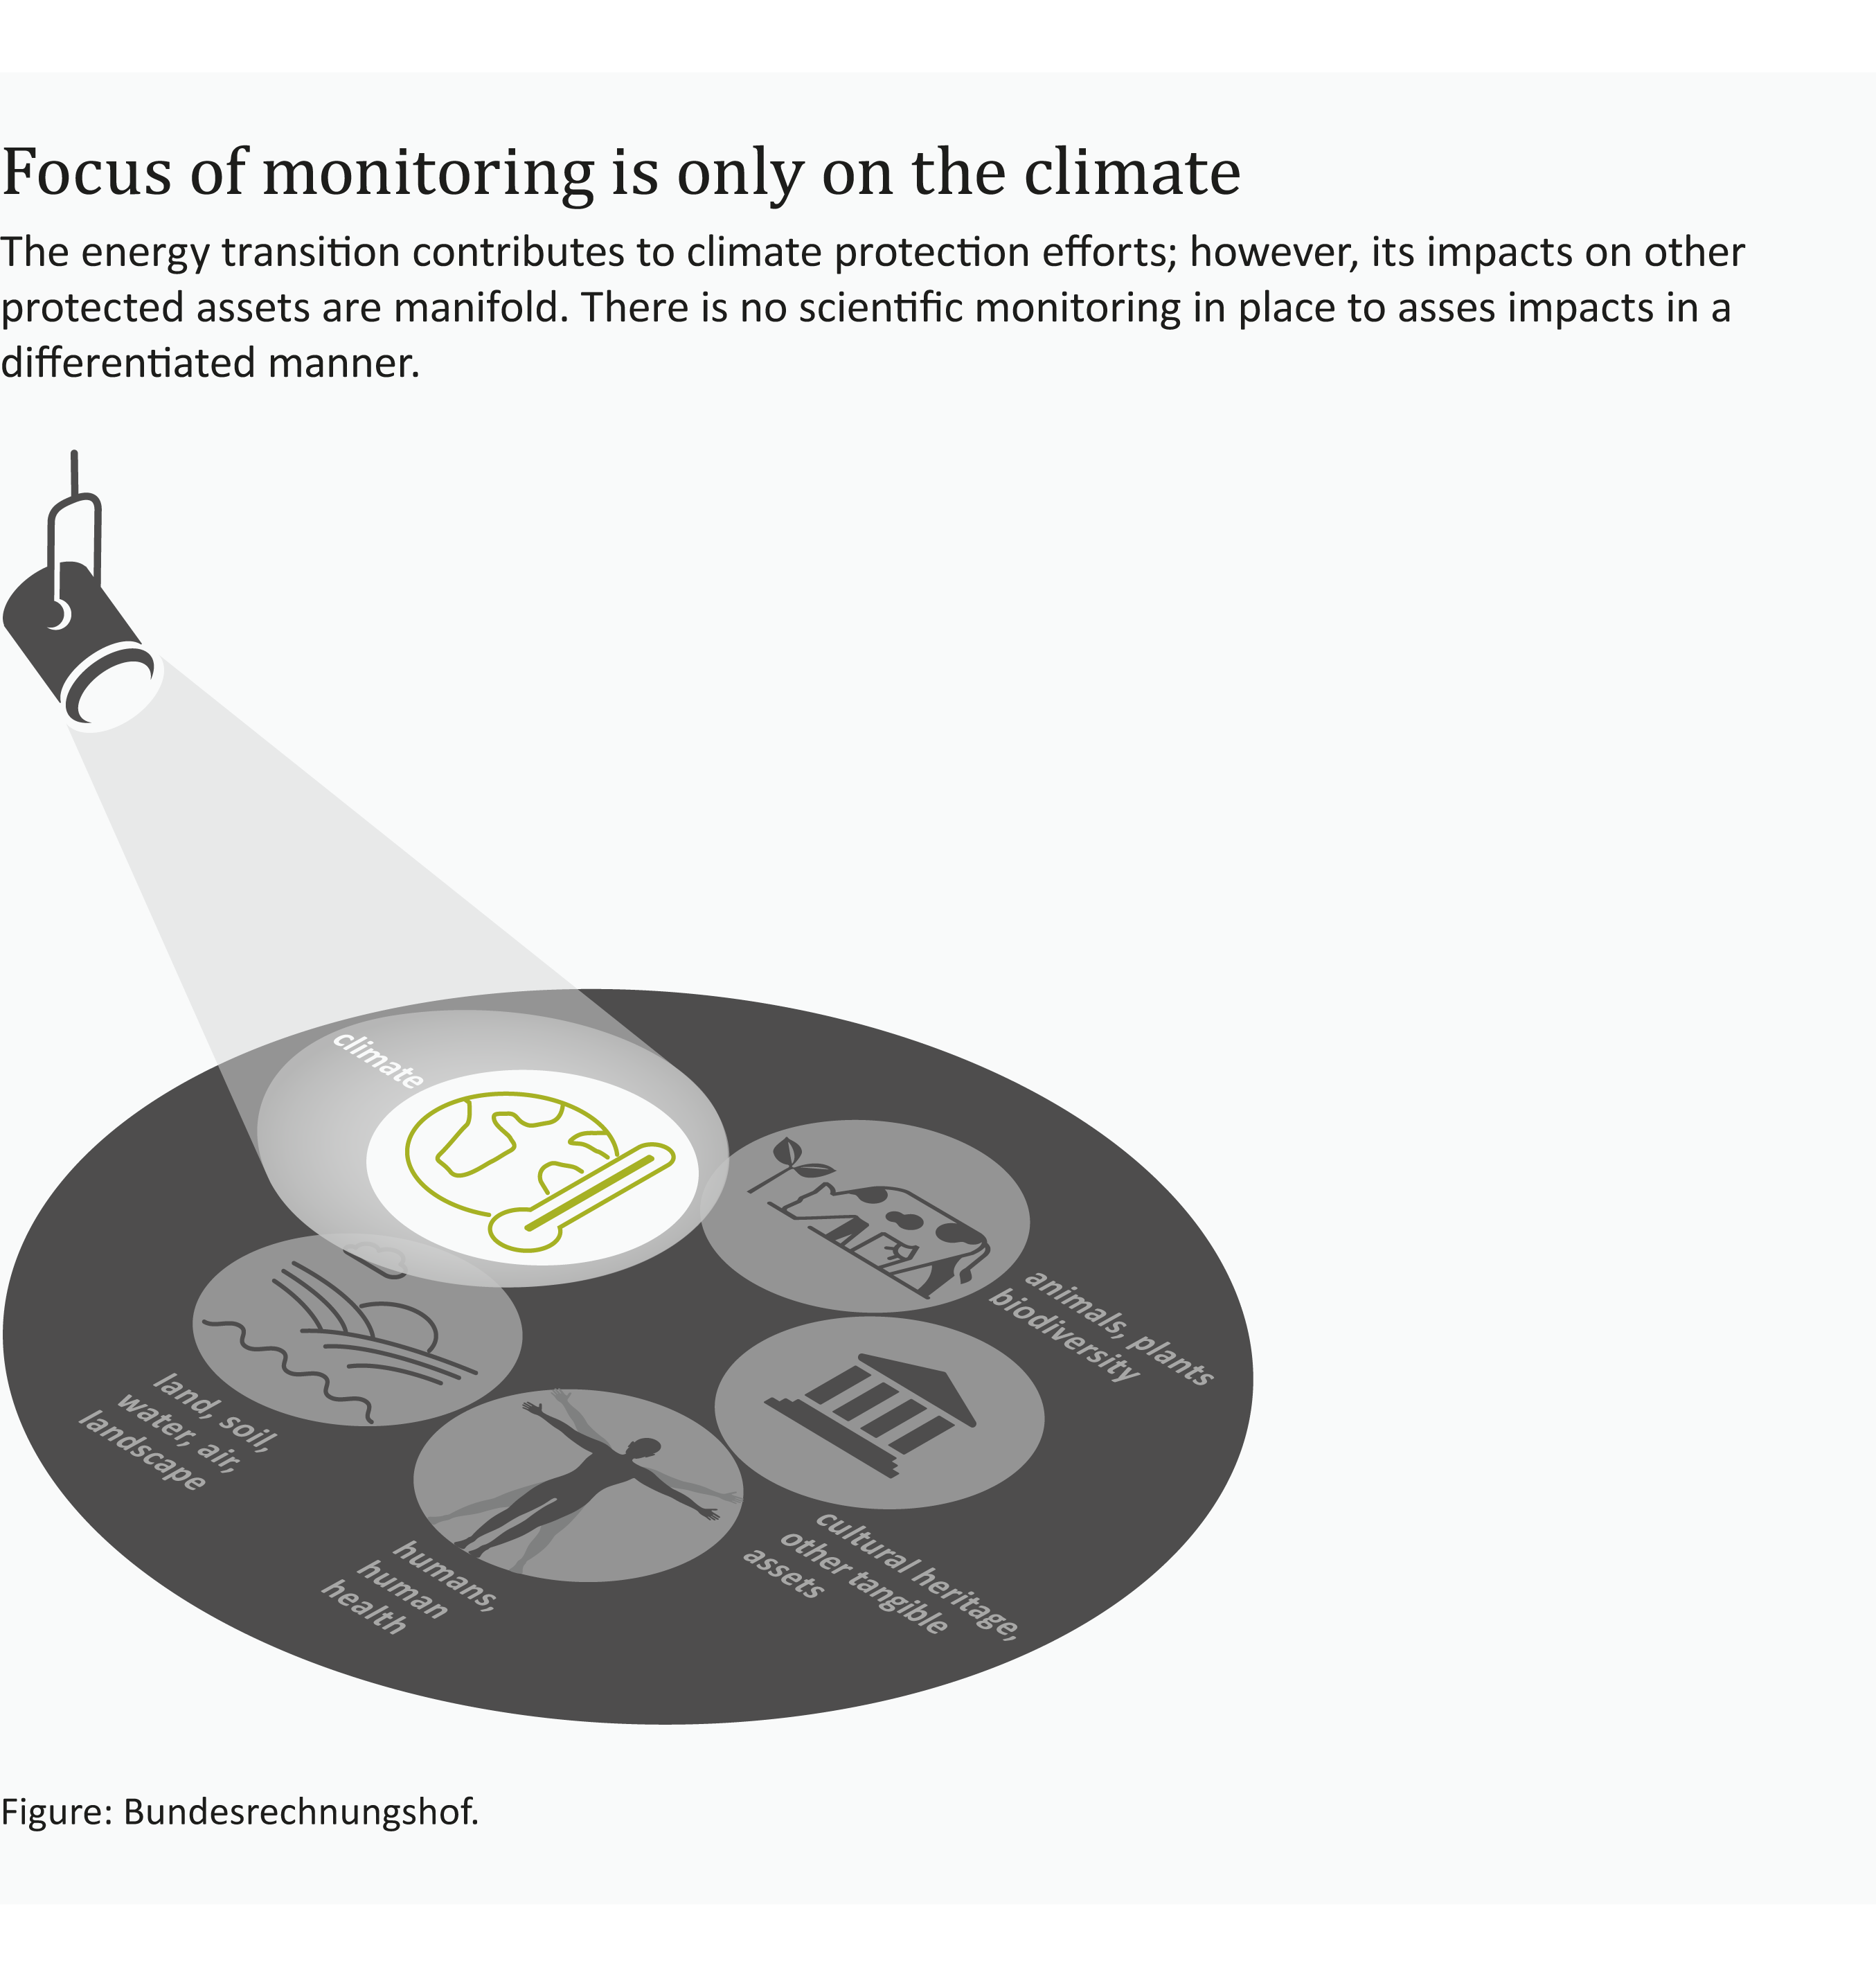 A graphic shows a gray circle with five symbols for the protected goods of environmental sustainability. A spotlight is focused on the climate as a protected asset. Figure: Bundesrechnungshof.